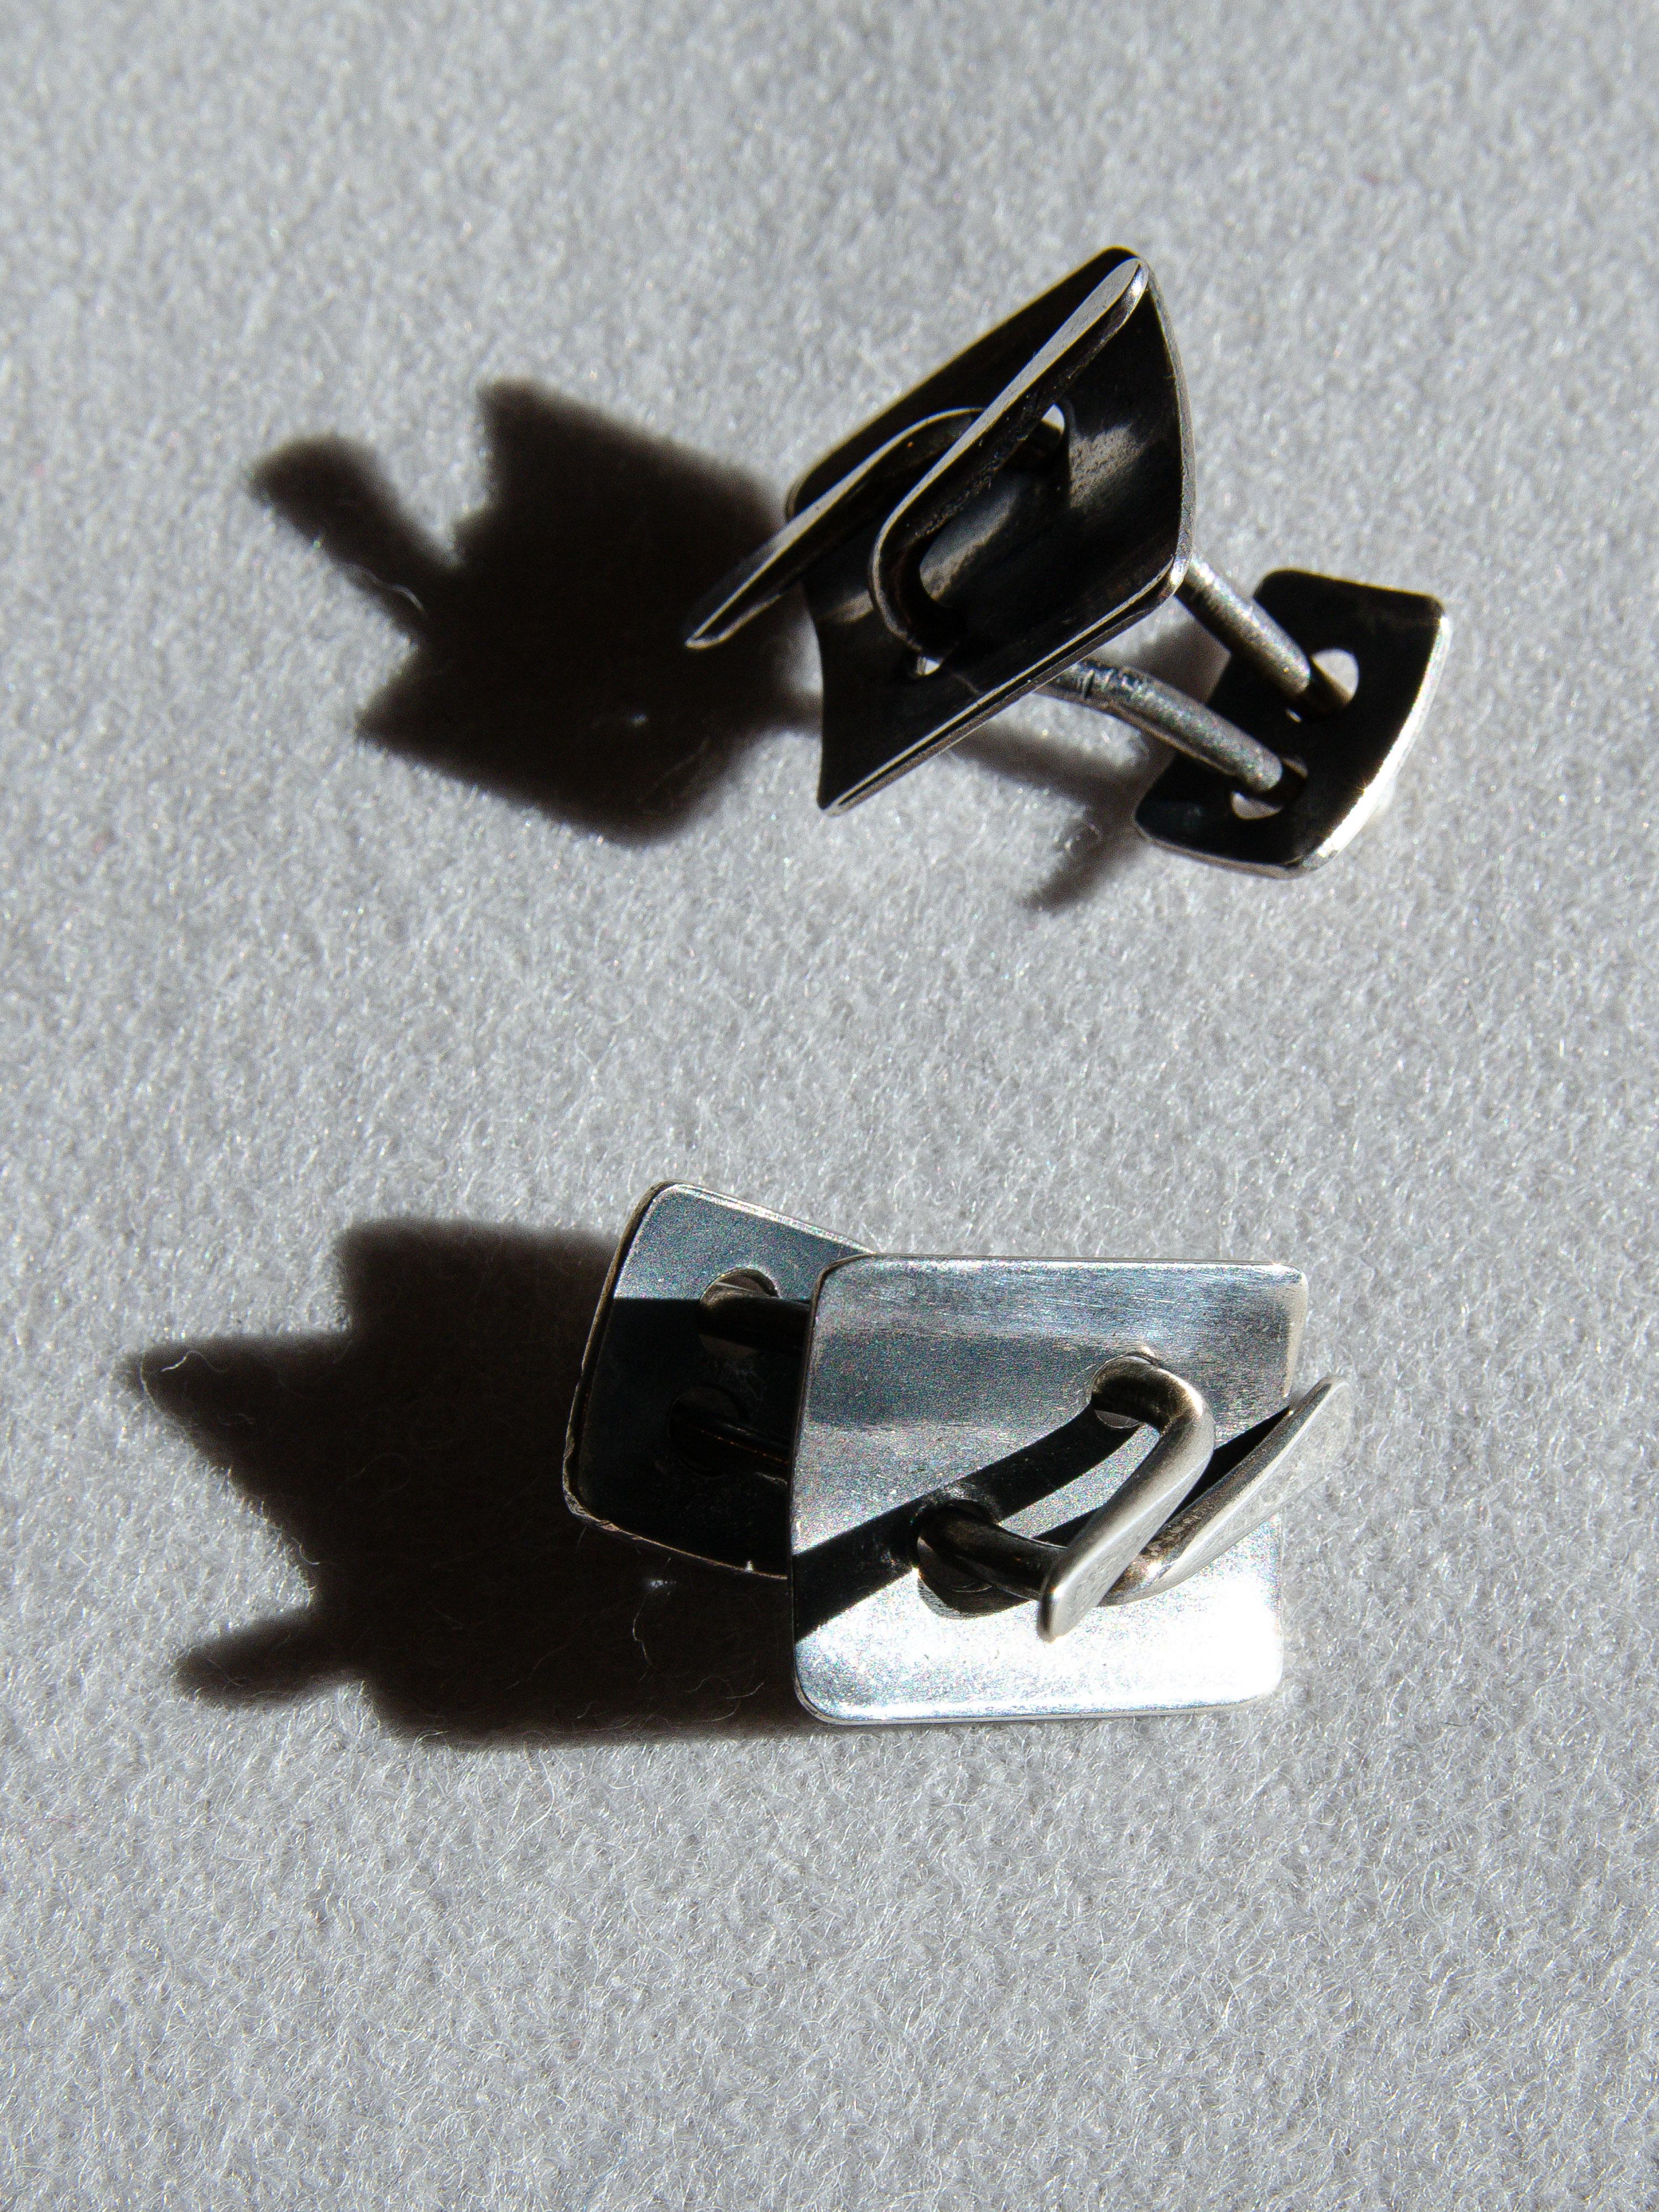 Rare pair of sterling silver cufflinks designed by Greenwich Village modernist jeweler Art Smith in the 1950's. Smith is considered a master jewelers during the modernist movement of the mid-twentieth century. 

Fusing eclectic influences such as